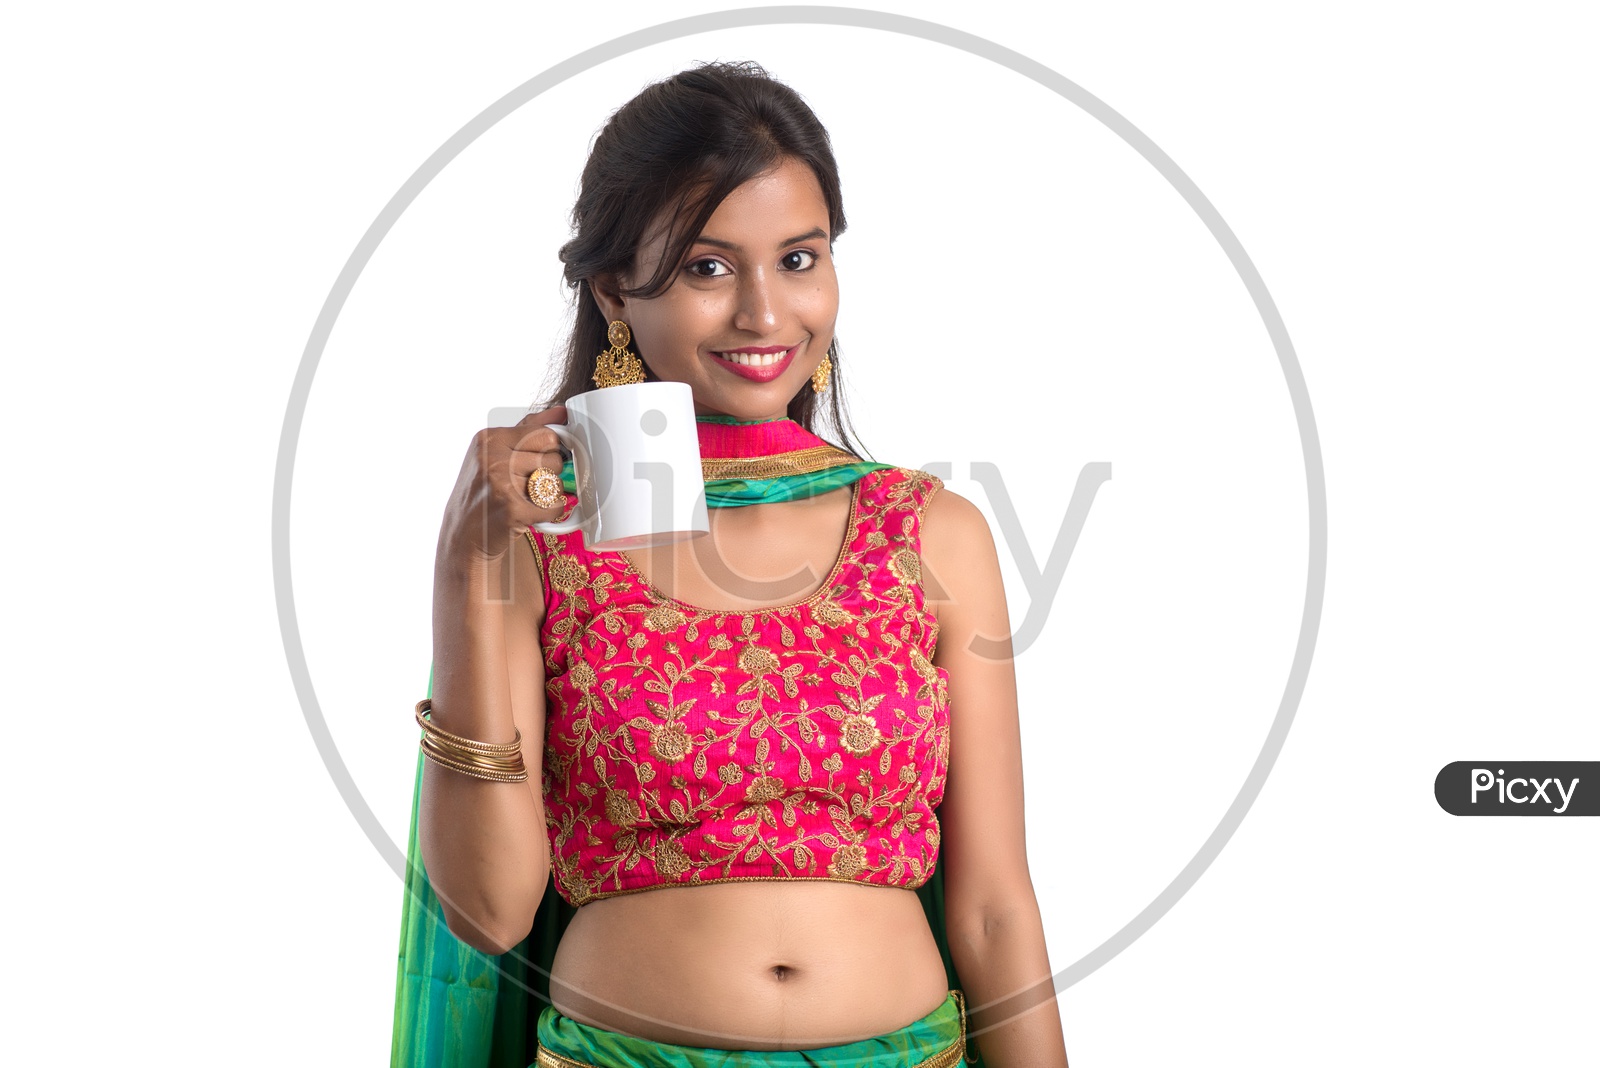 Portrait Of a Young Indian  Traditional Girl Enjoying A Cup Of Tea Or Coffee Over a White Background